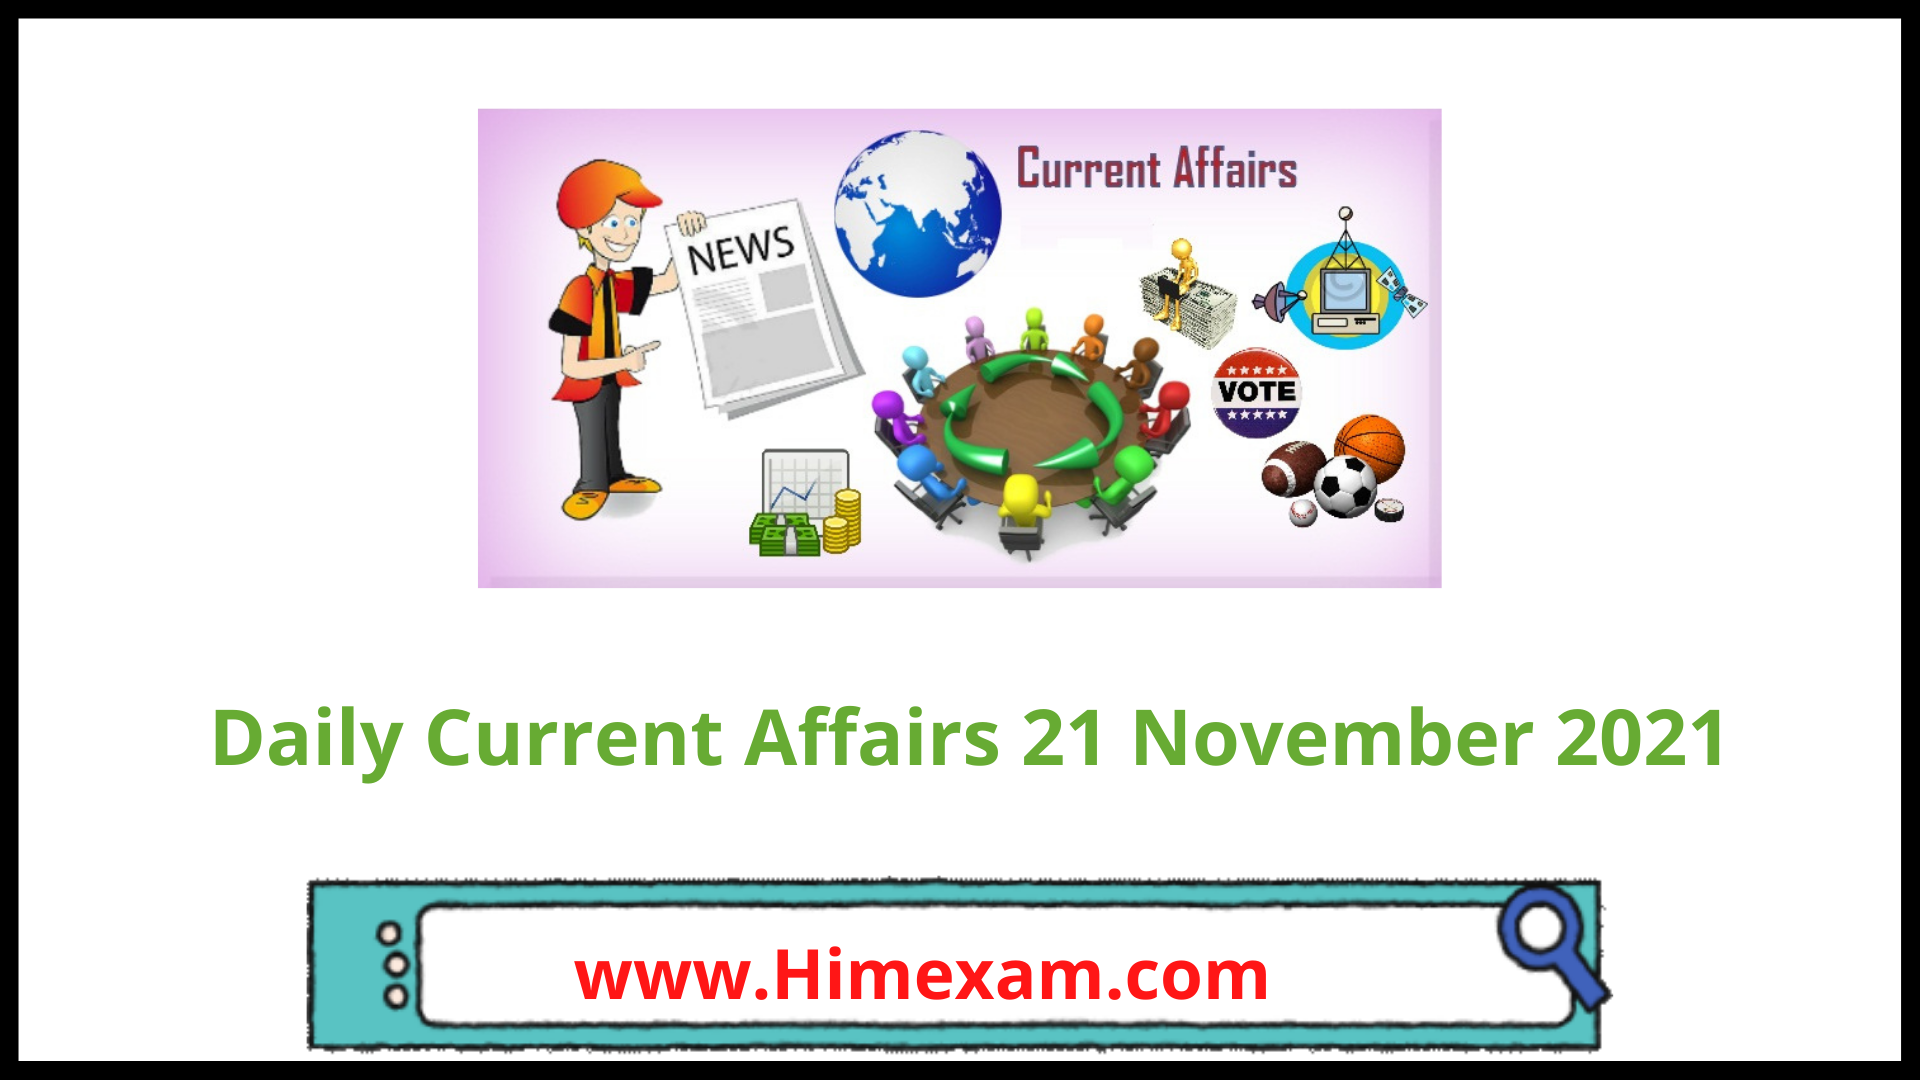 Daily Current Affairs 21 November 2021